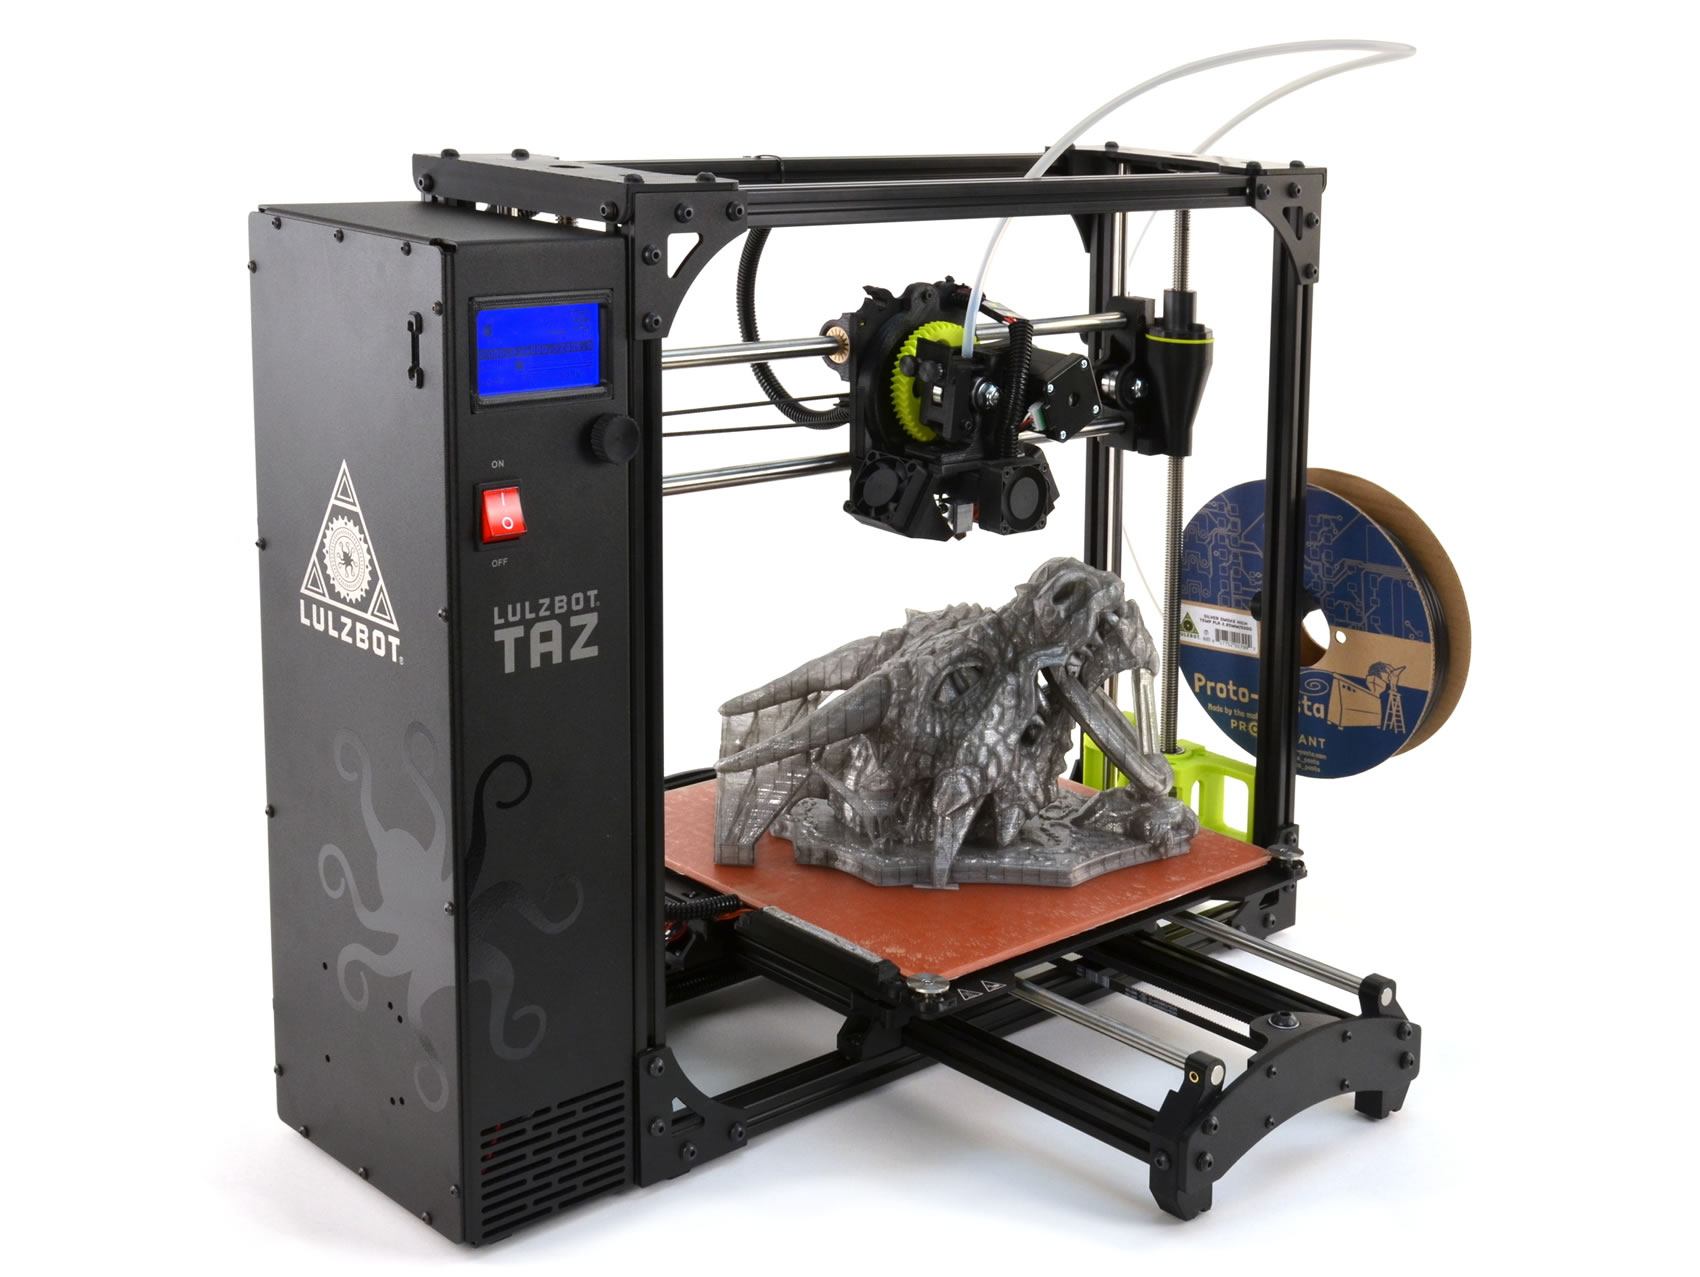 LulzBot and the creation of innovation image source - Aleph Objects Inc.